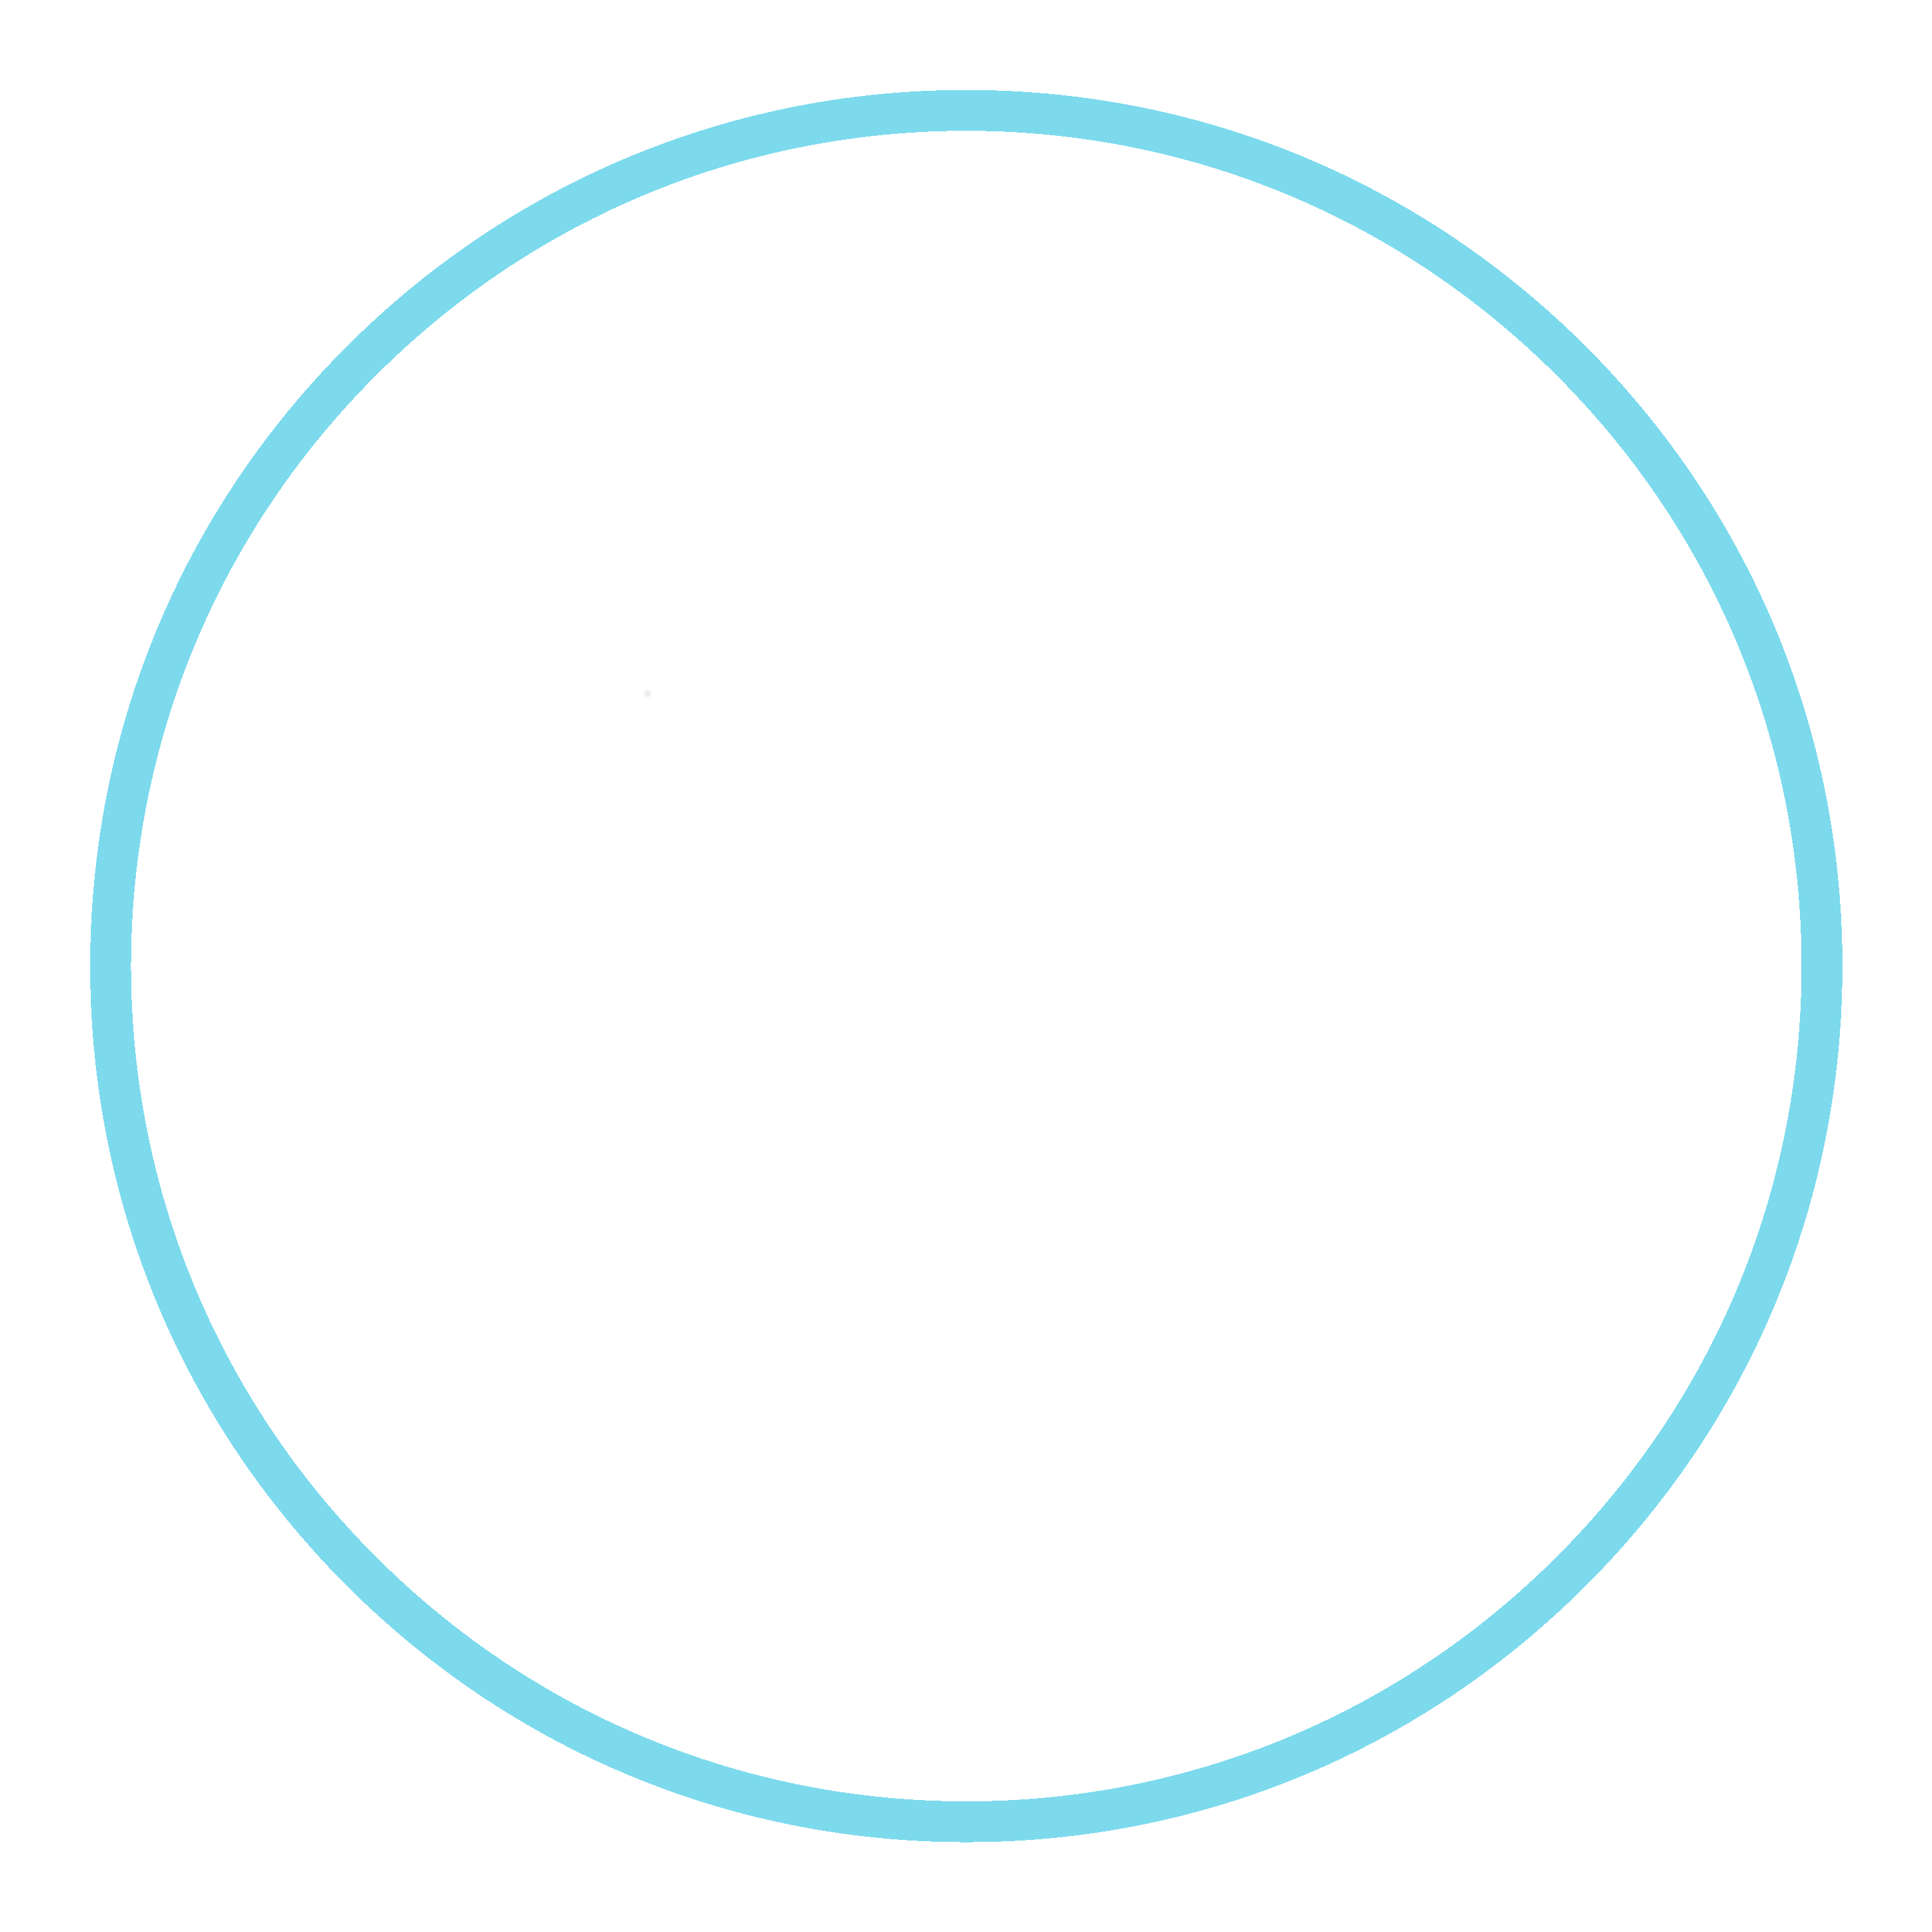 Detective Society Logo White and Blue